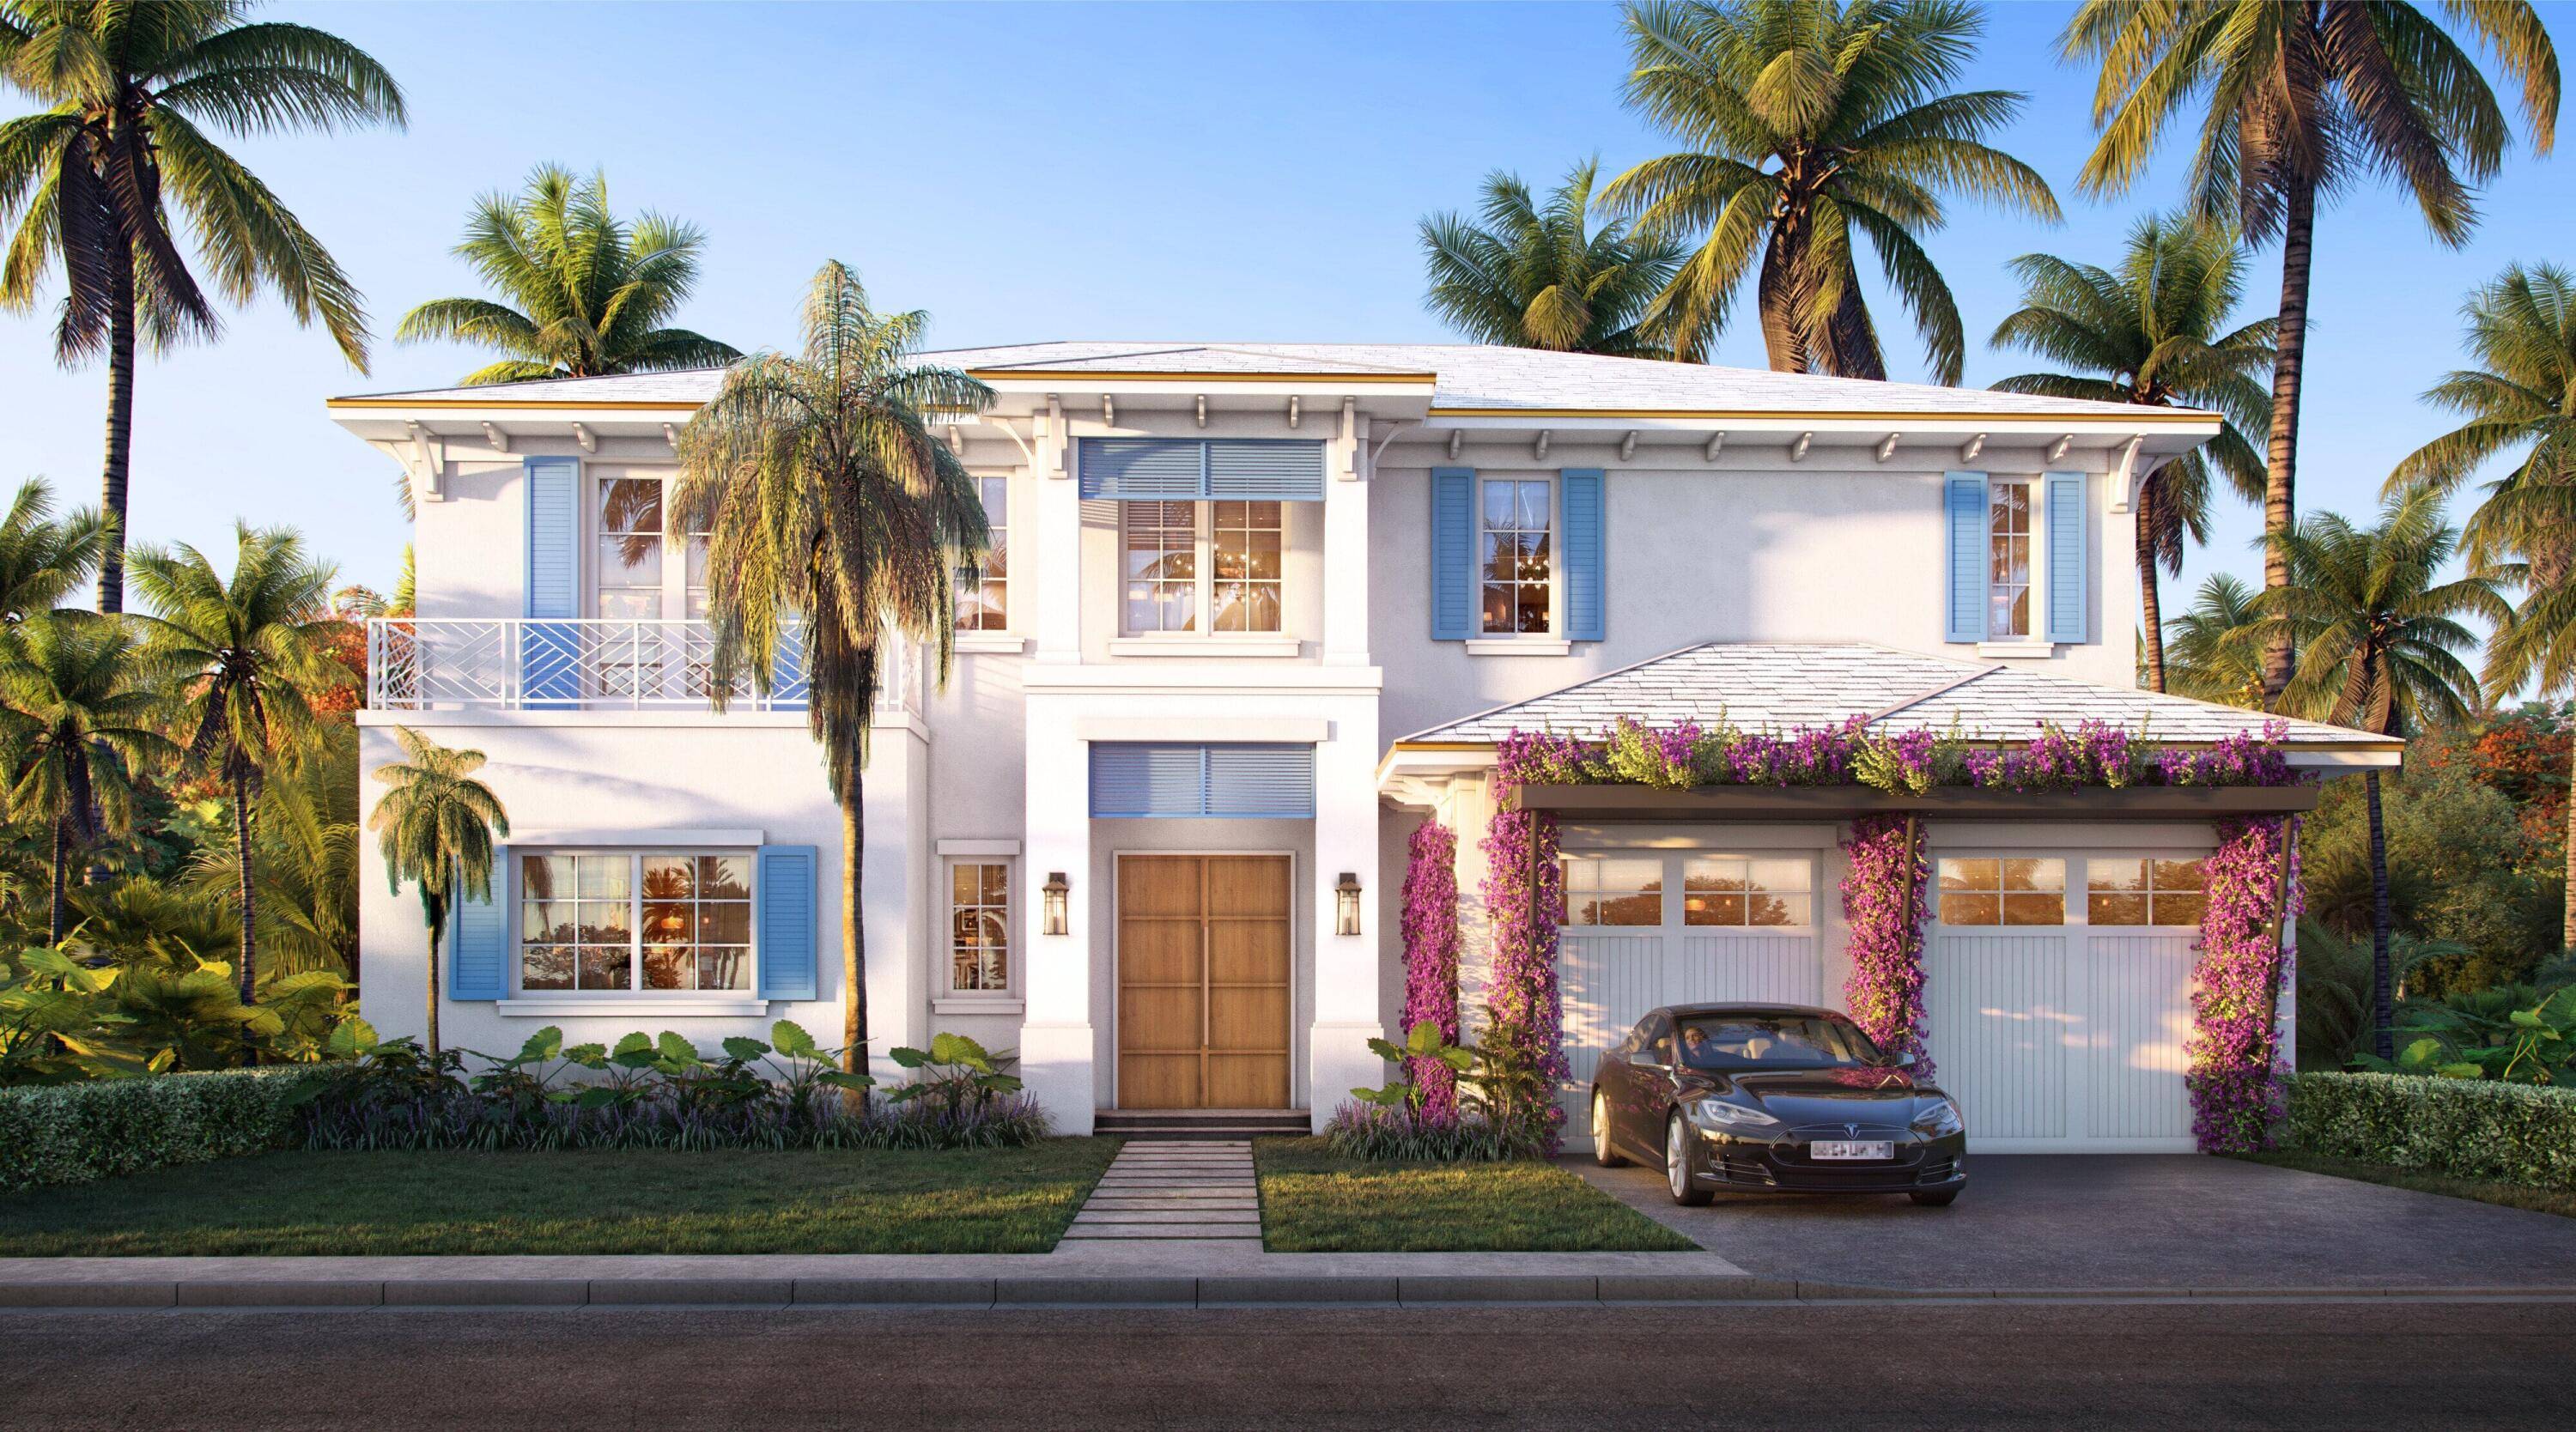 Welcome to 127 Murray, a premier new construction residence in one of the most desirable locations in the entire Palm Beach area.